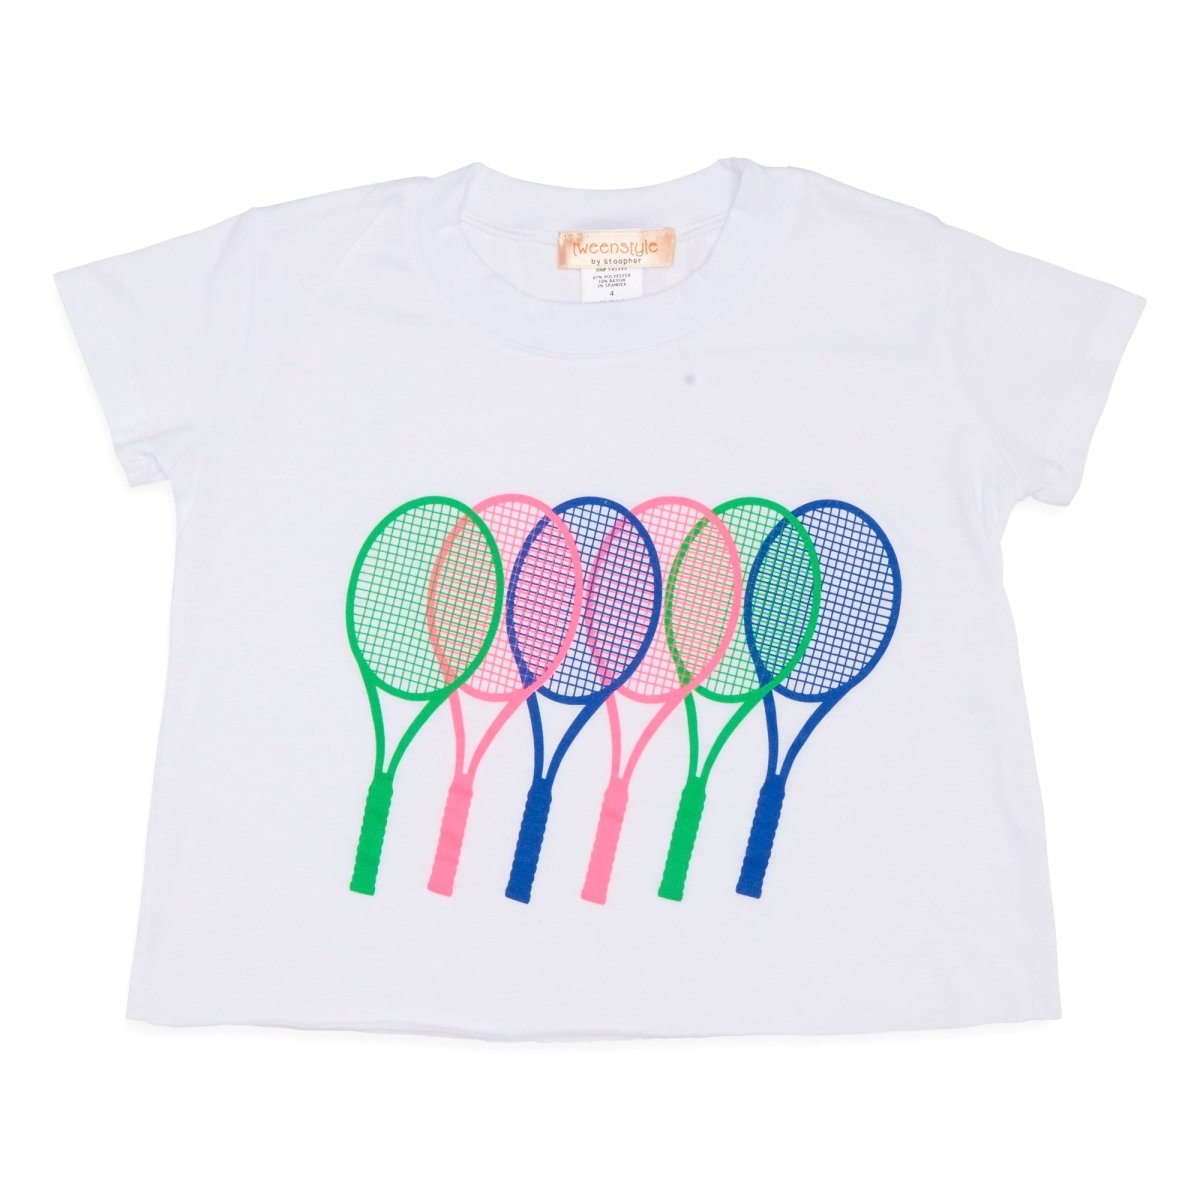 TENNIS TSHIRT - SPARKLE BY STOOPHER